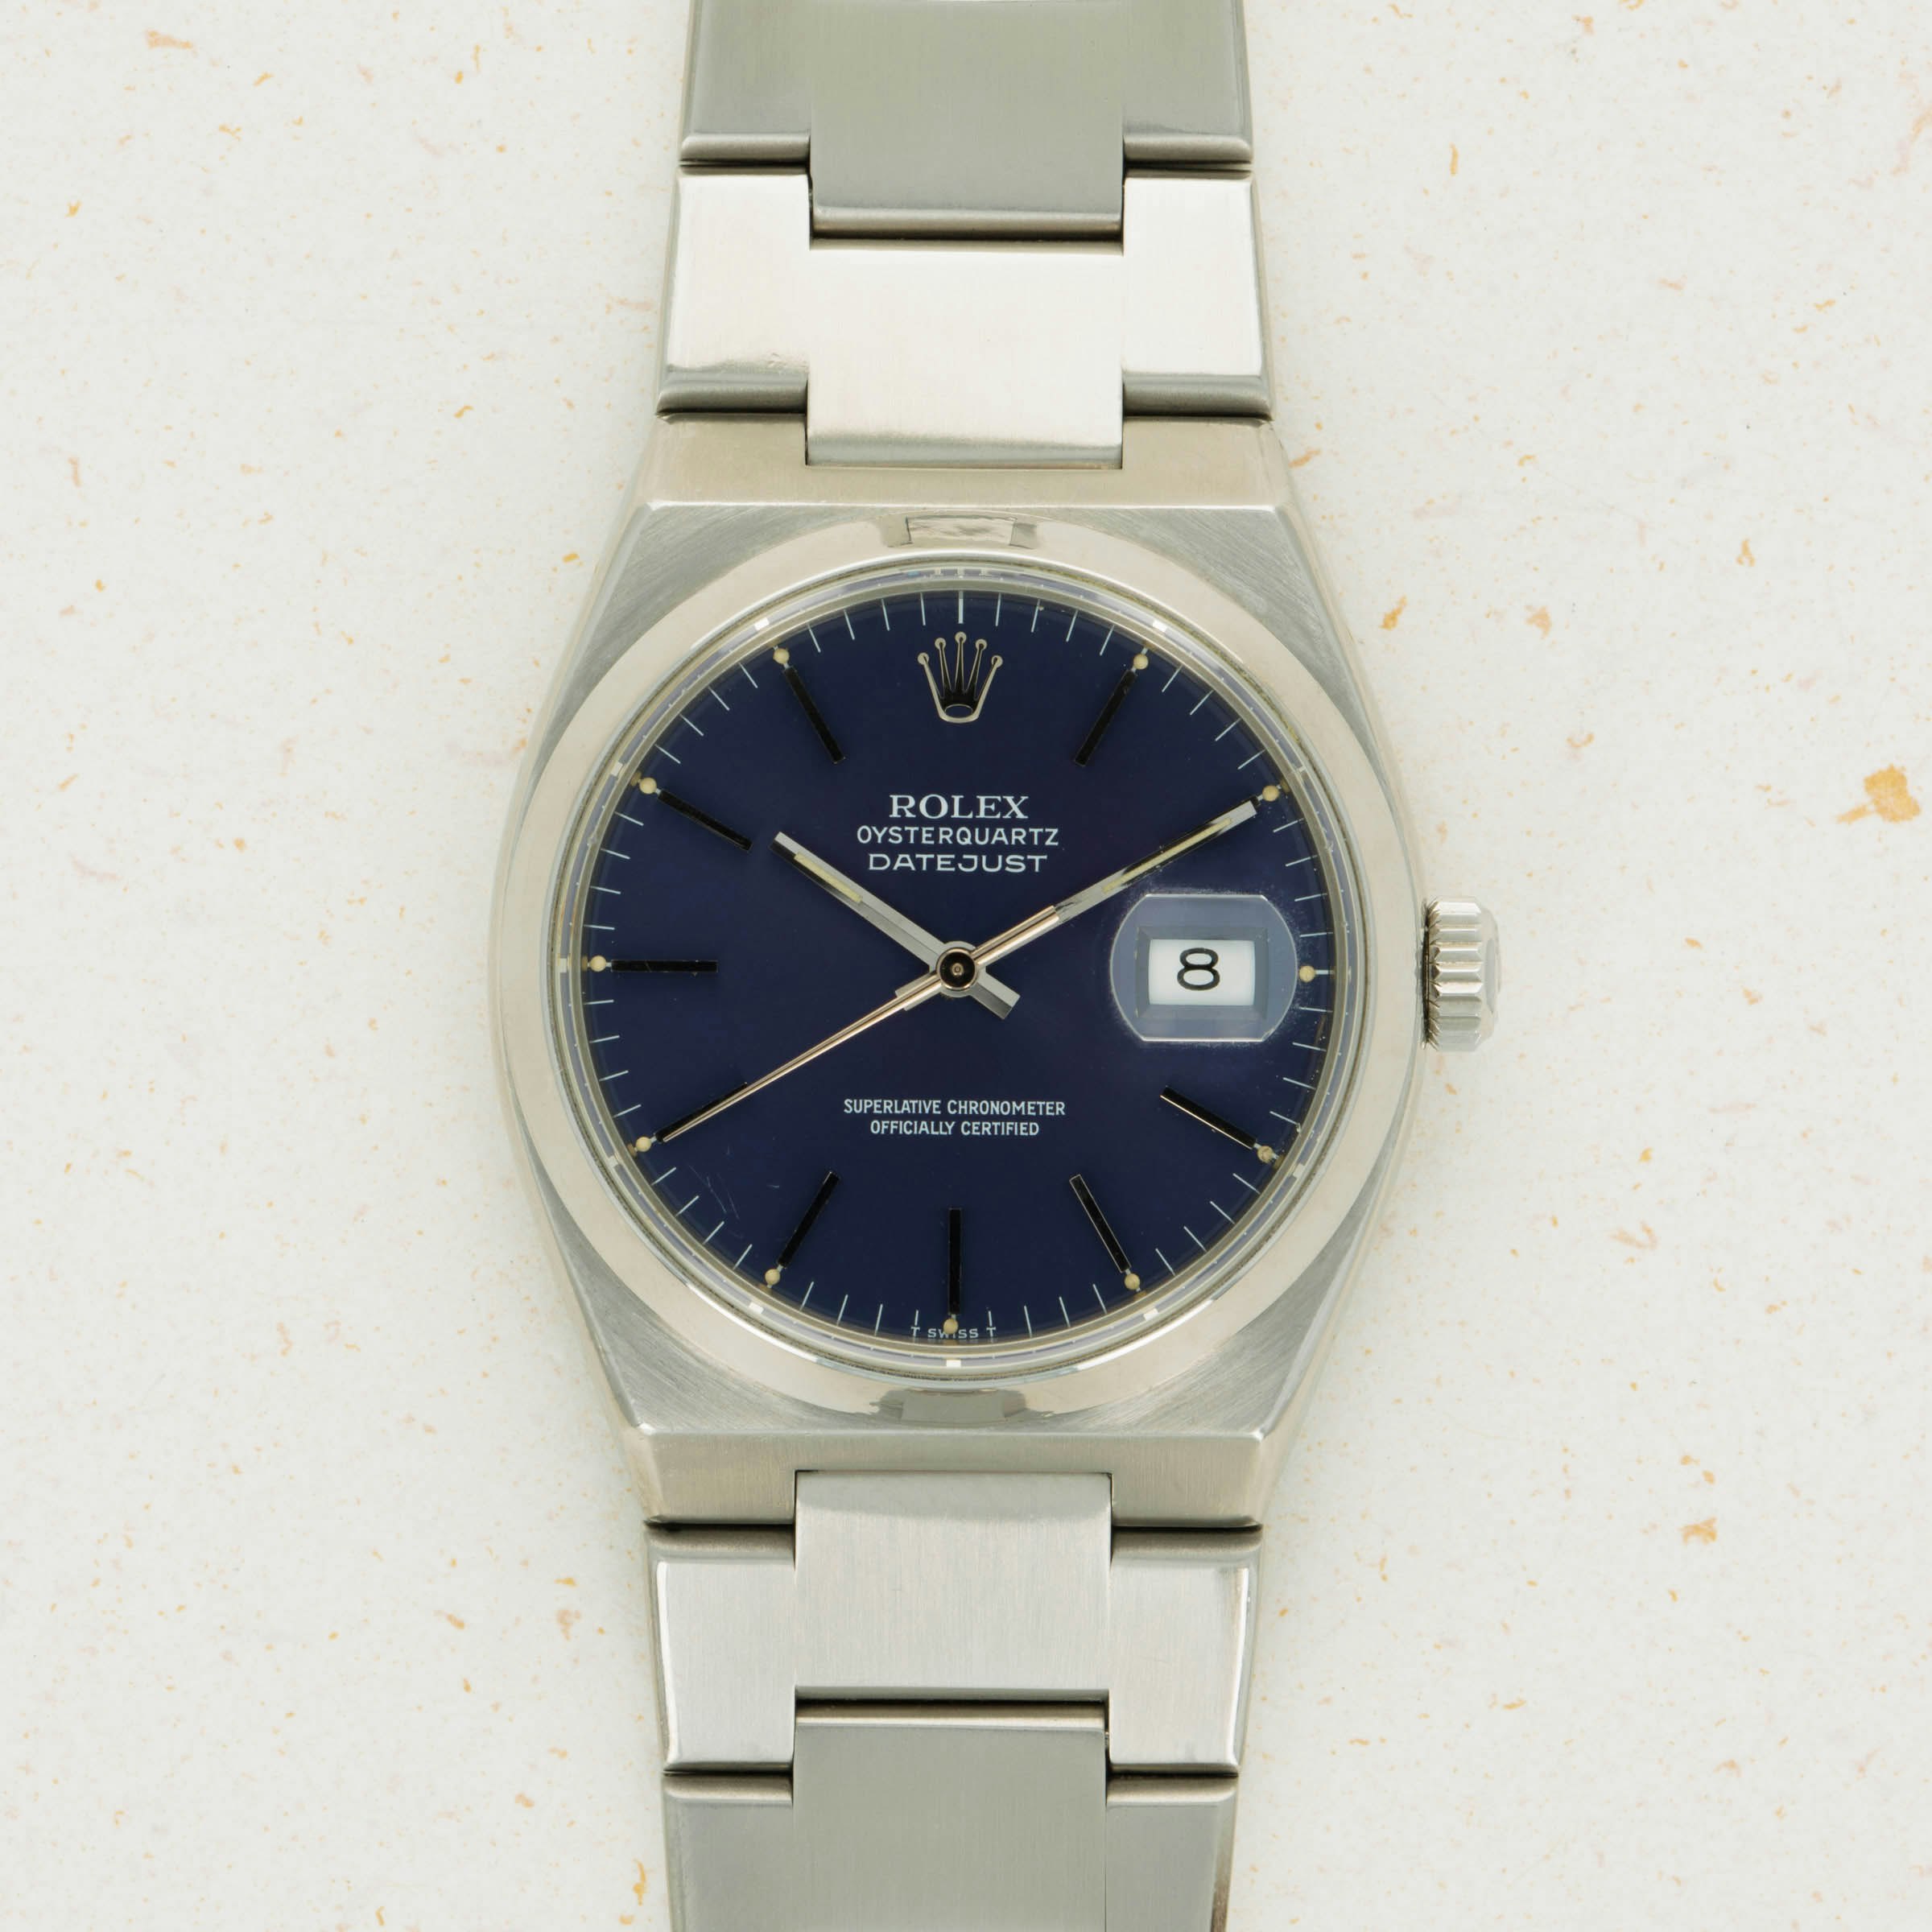 Thumbnail for Rolex Oysterquartz 17000 Stainless Steel Blue Dial